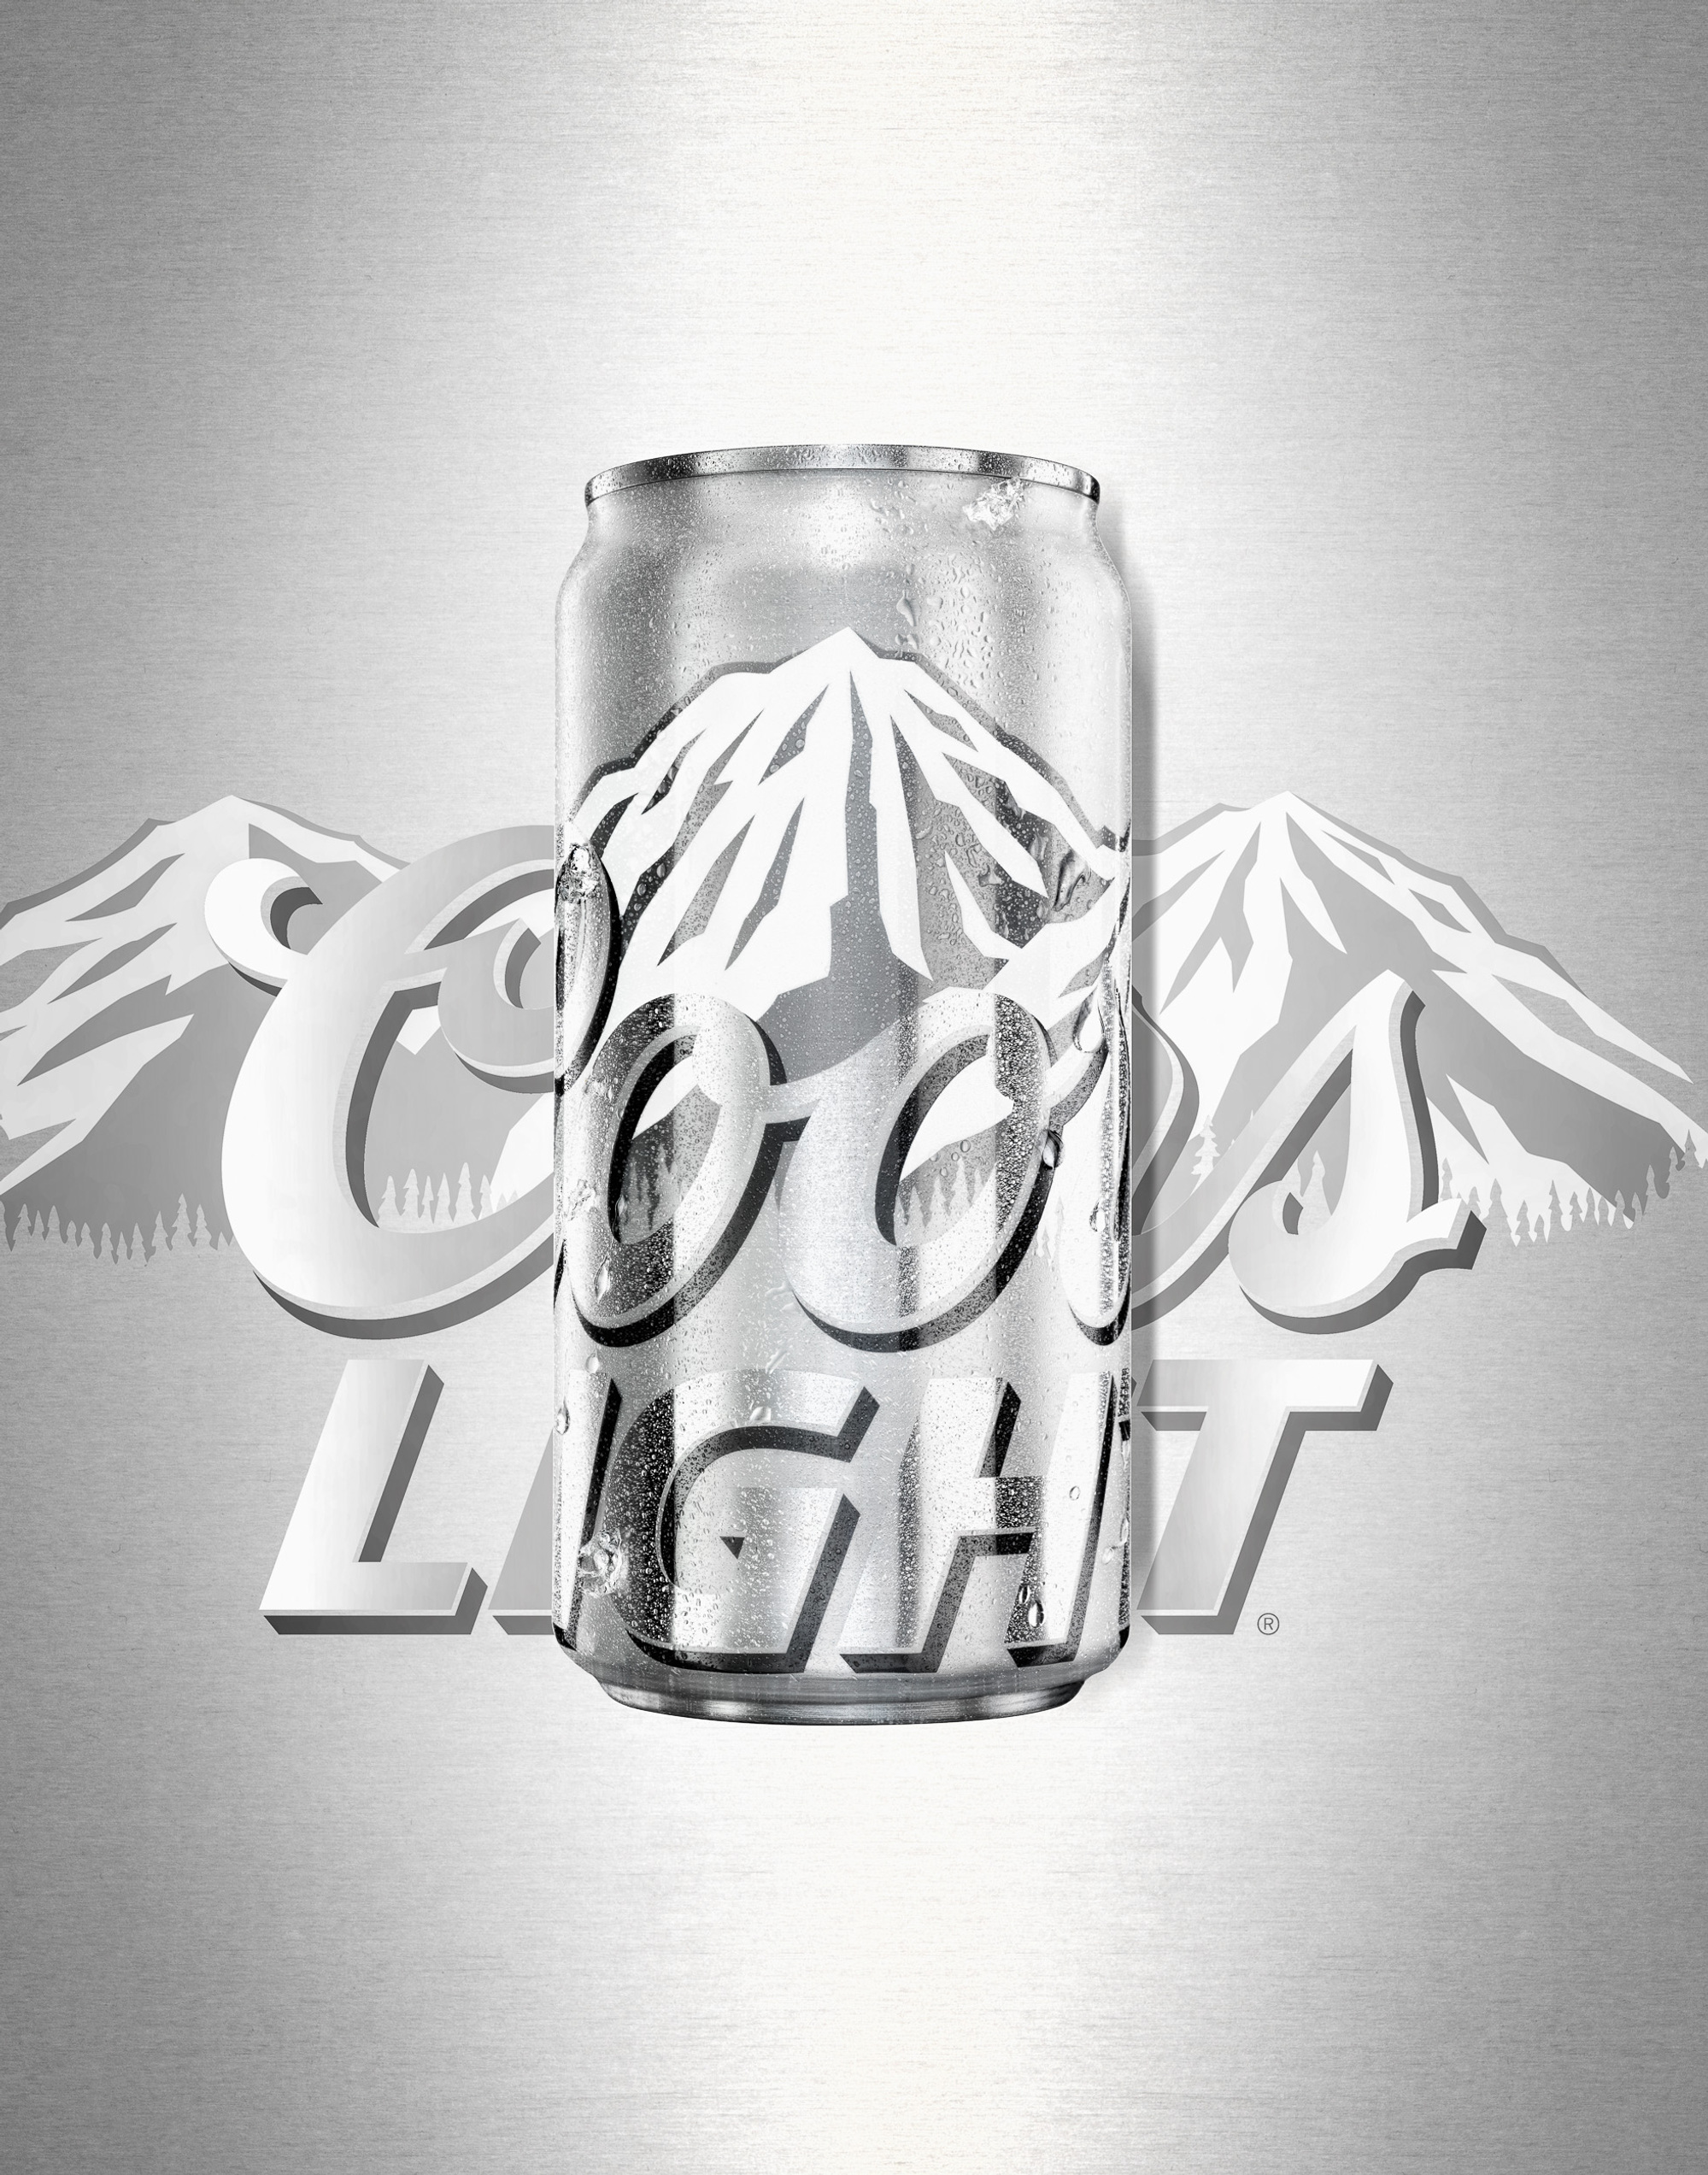 Coors Light Beer cans. Beverage & Liquor product advertising photography by Timothy Hogan Studio in Los Angeles